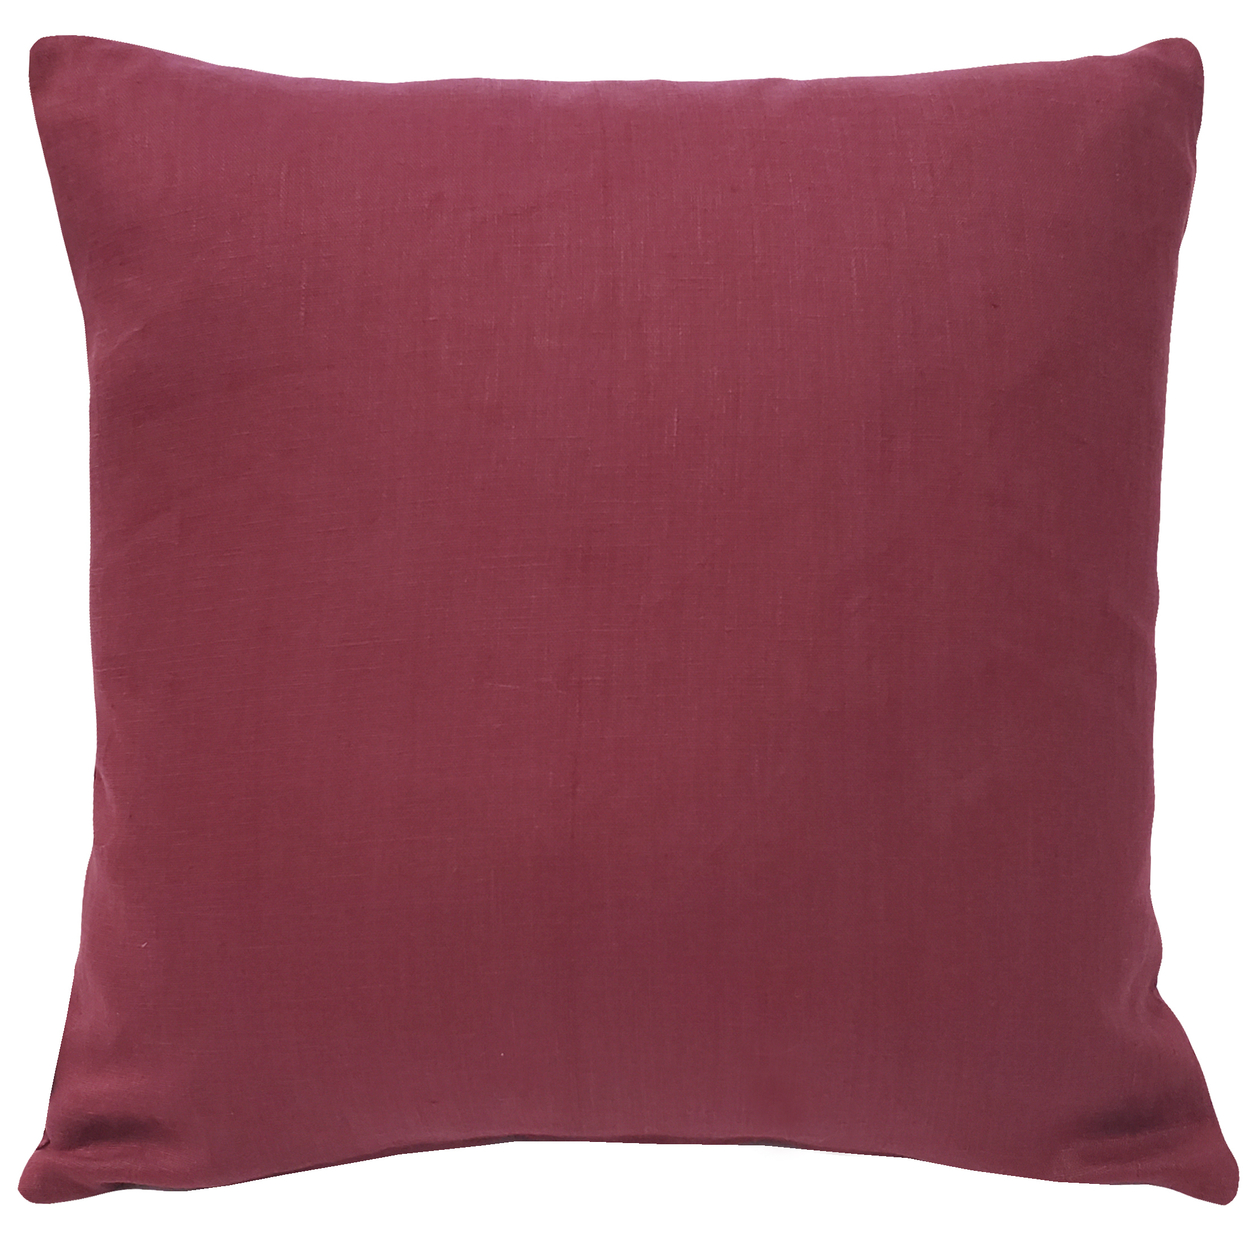 Tuscany Linen Wine Throw Pillow 17x17, With Polyfill Insert